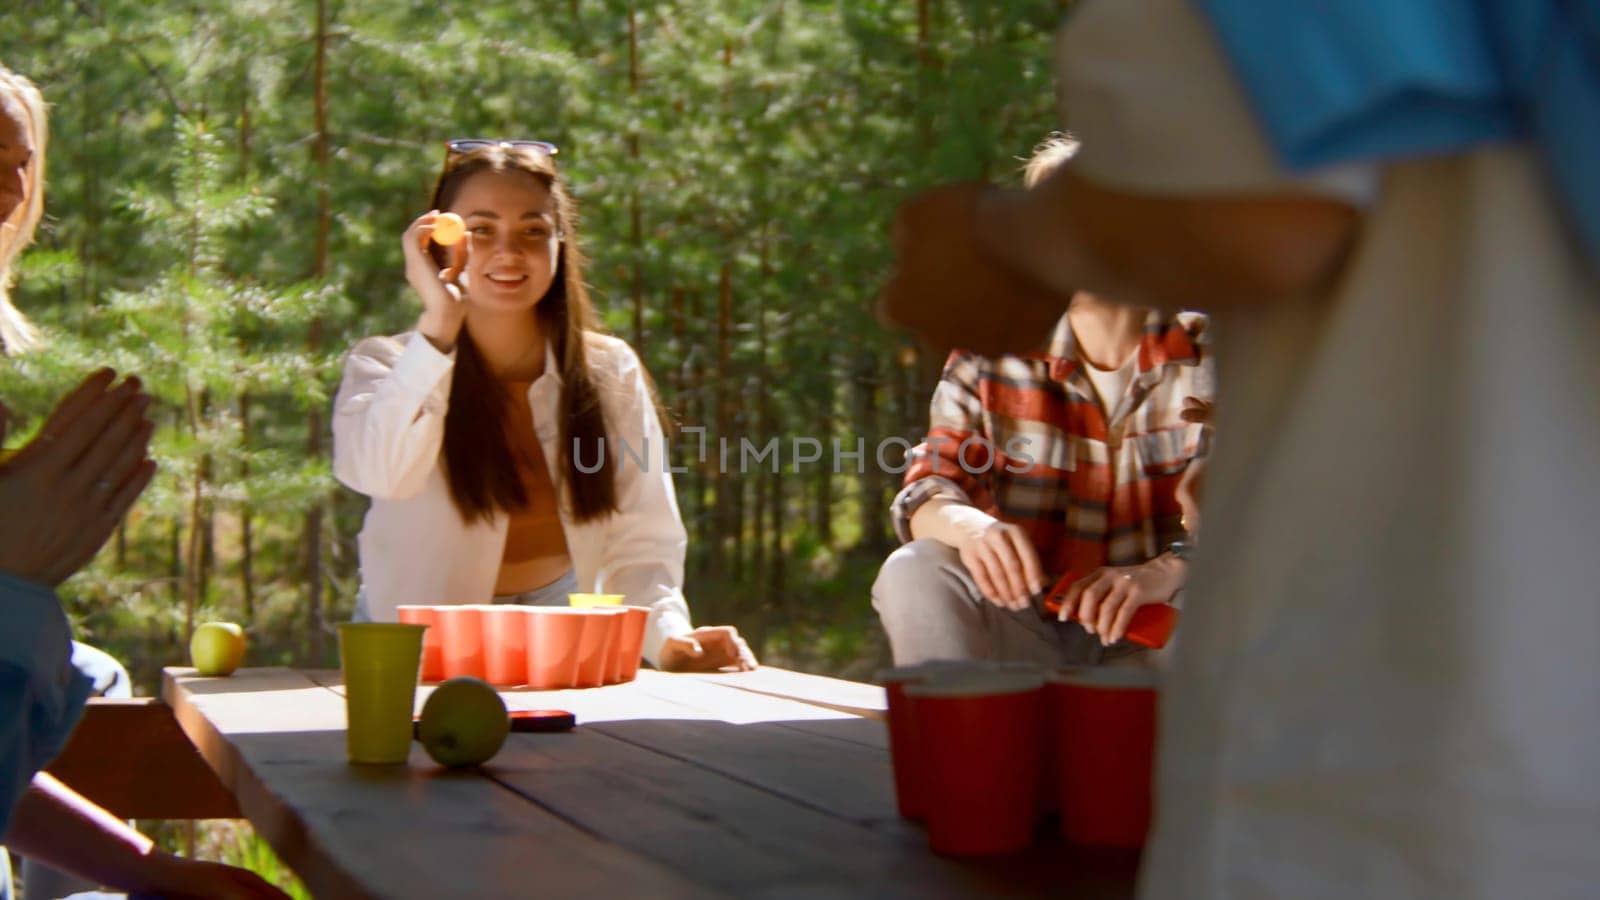 Young woman playing beer pong. Stock footage. Beautiful woman throws ball into glass of beer. Fun game for friends with alcohol and ping pong in nature in summer.